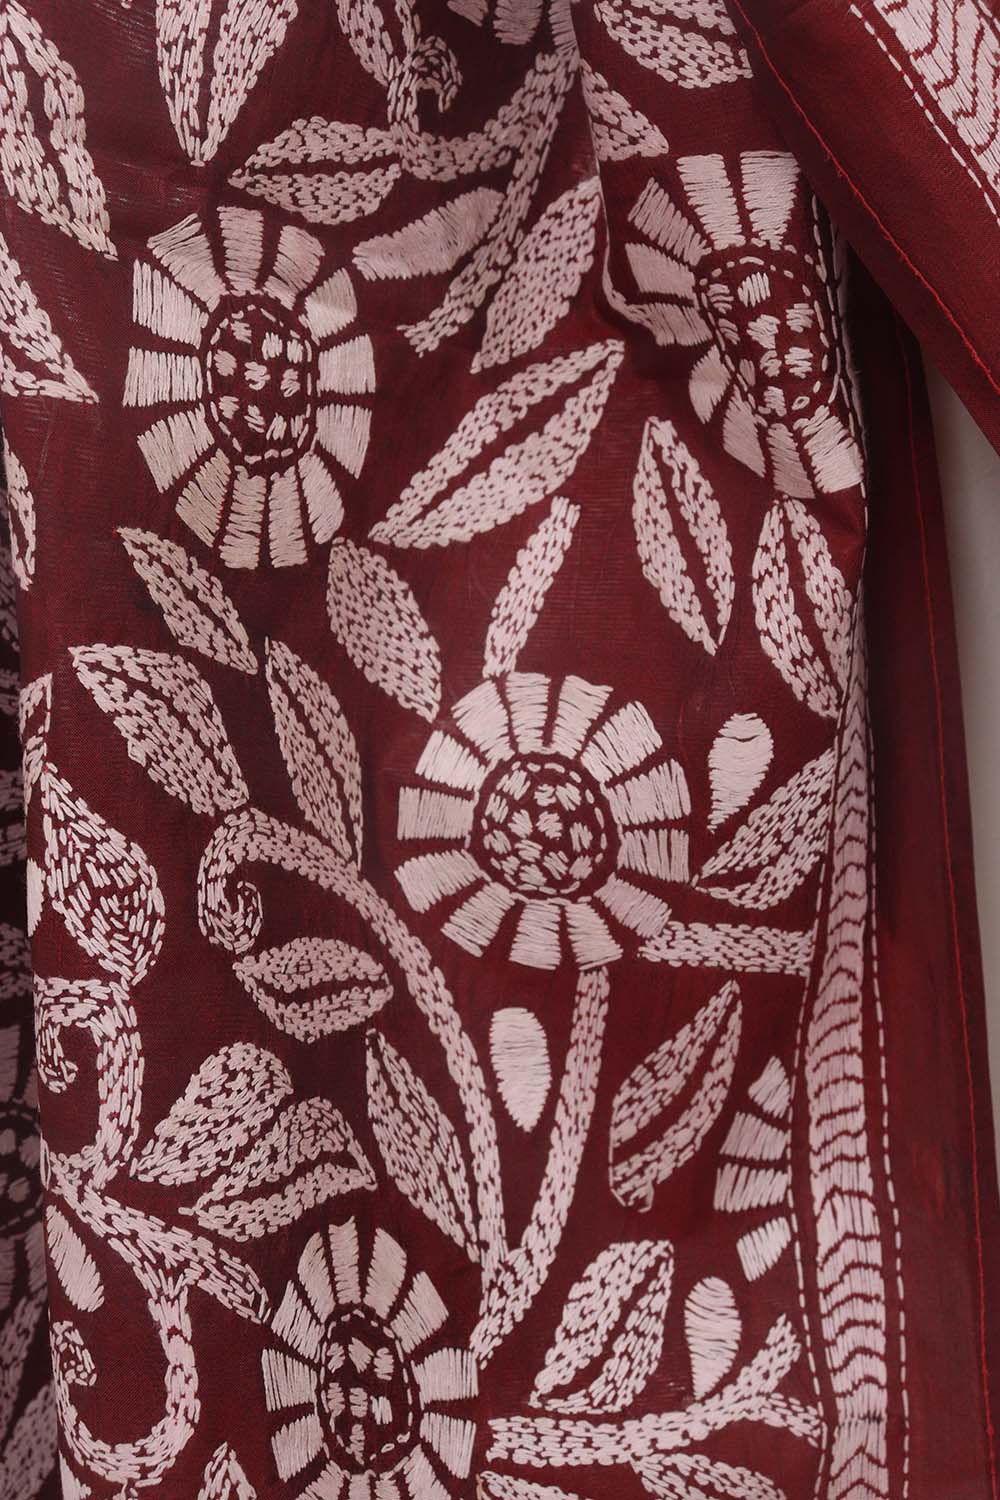 Elegant Maroon Kantha Silk Stole with Hand Embroidery - Luxurion World